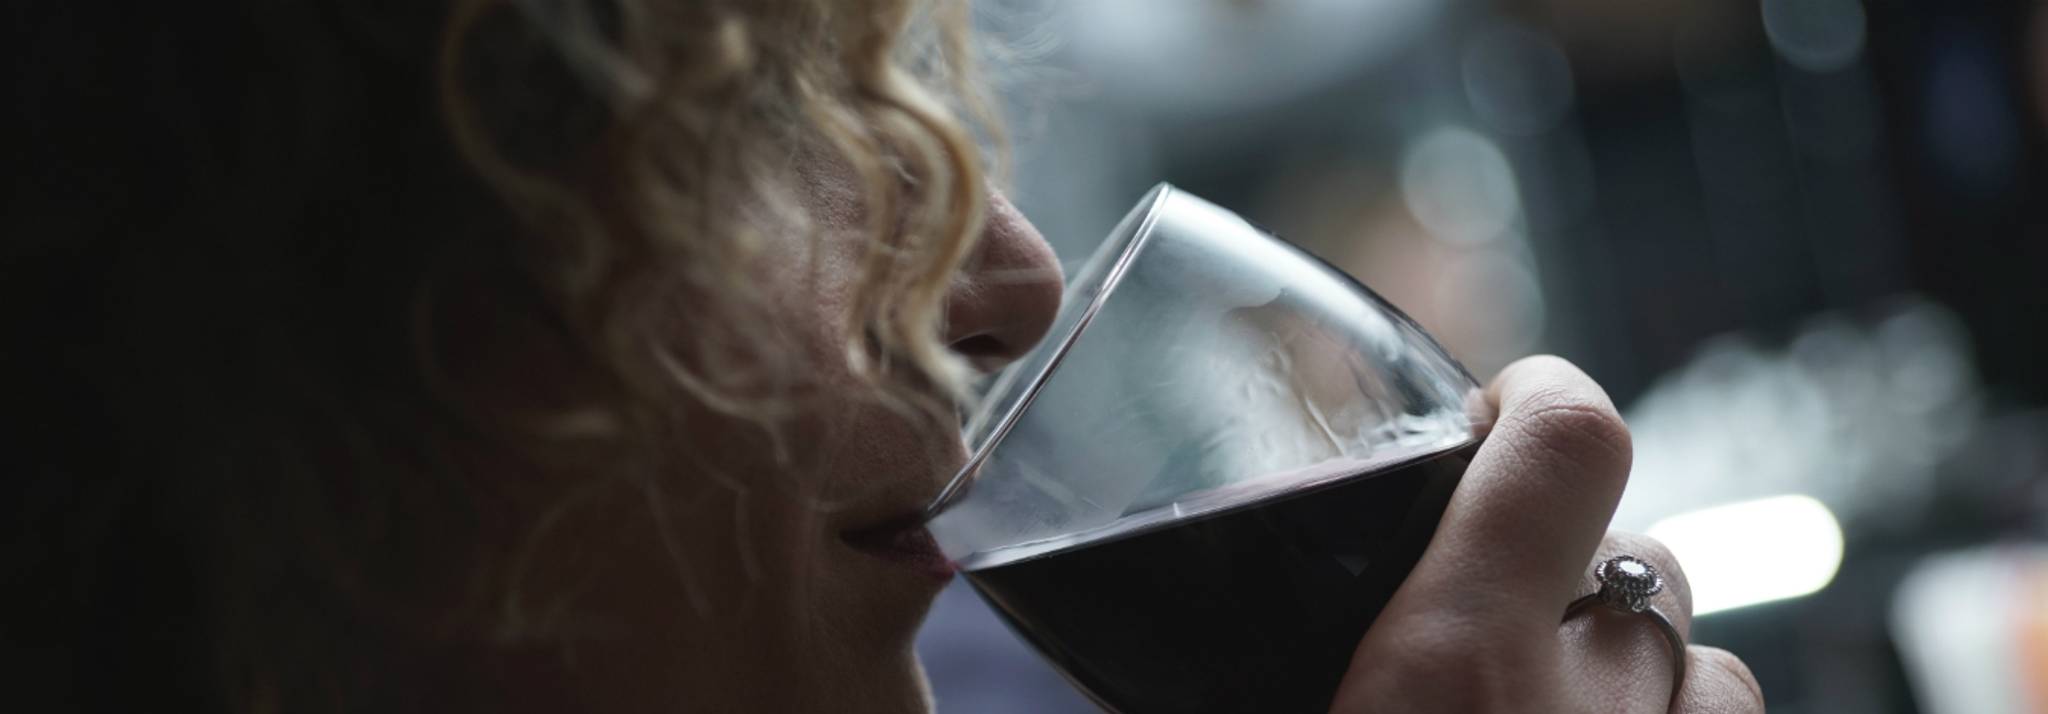 Why Australian mums worry about that glass of wine